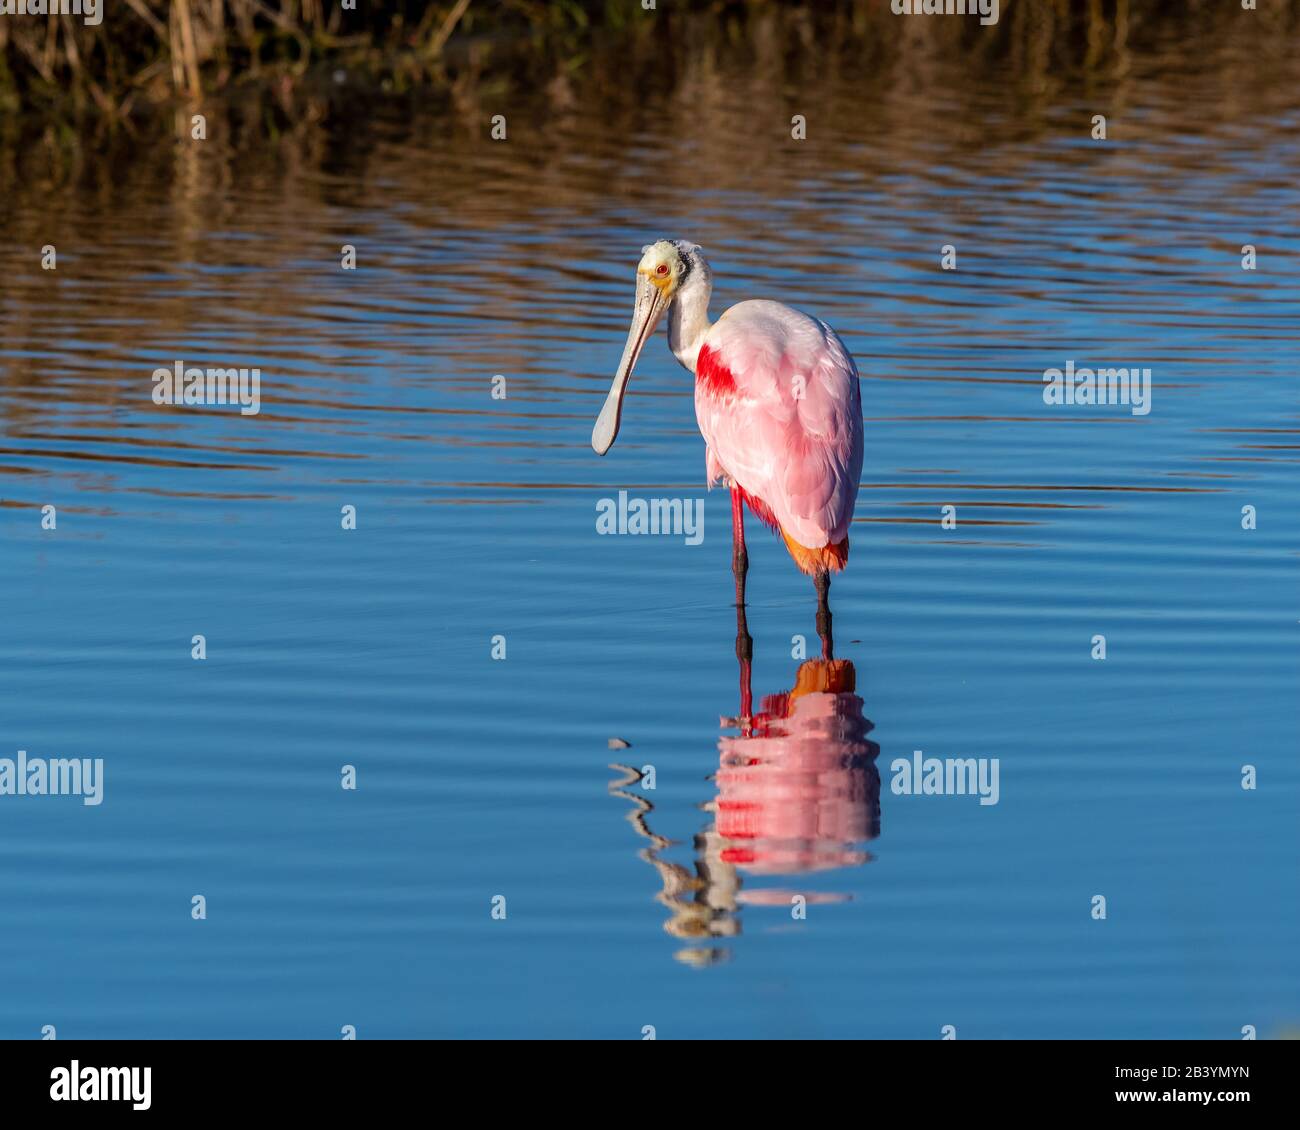 A roseate spoonbill (platalea ajaja) bird wading is reflected in the water in Florida, USA. Stock Photo